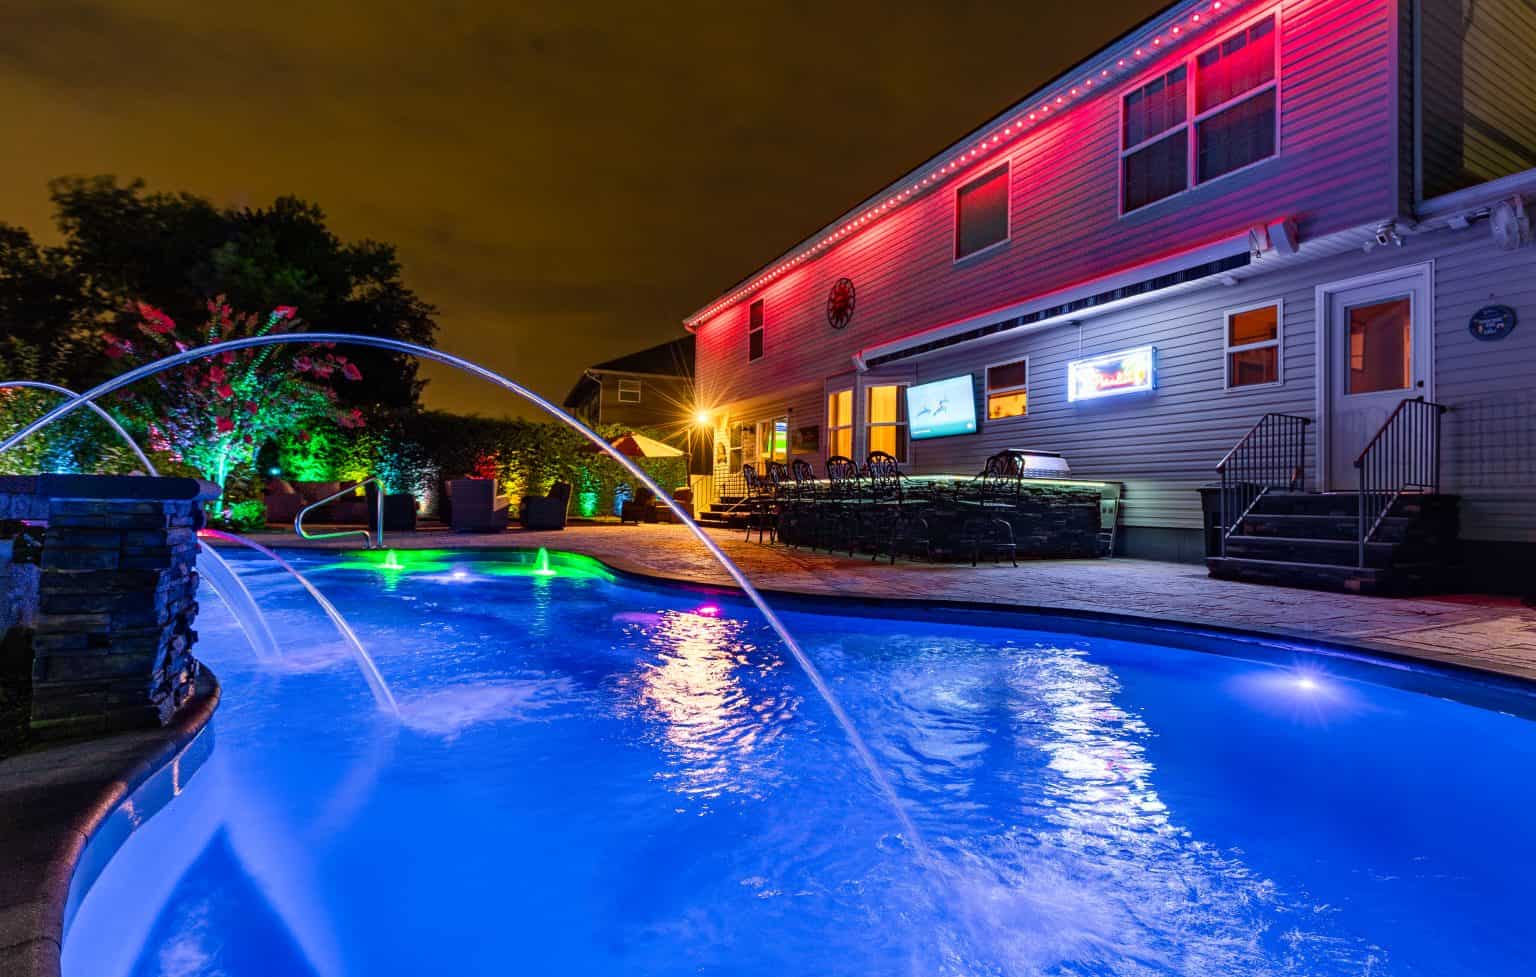 pool and backyard at dusk with ambient lighting.